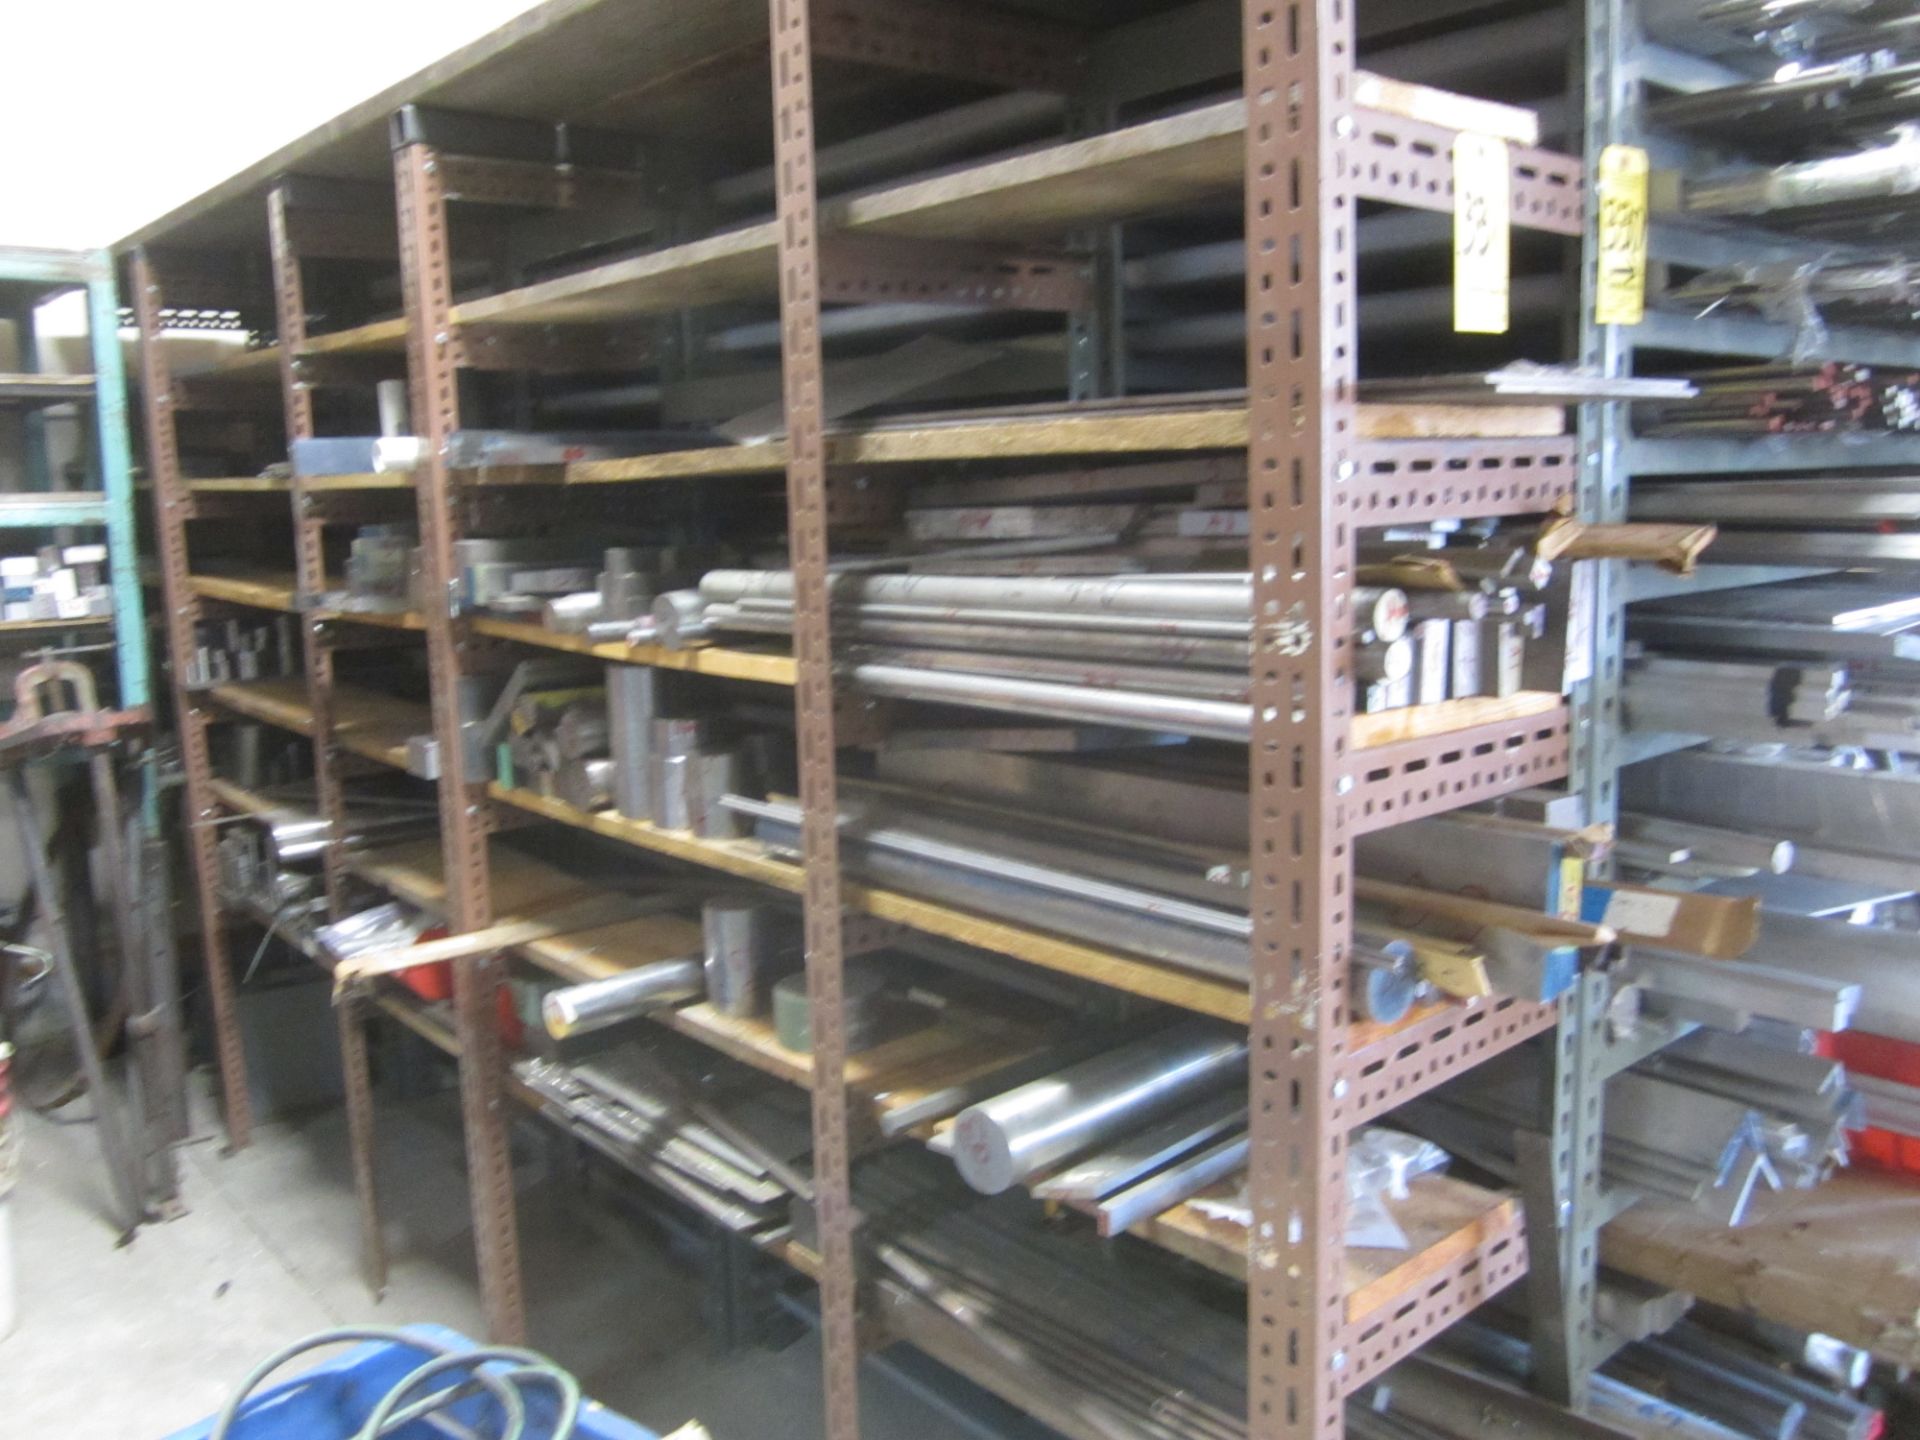 Shelving and Contents of Miscellaneous Steel